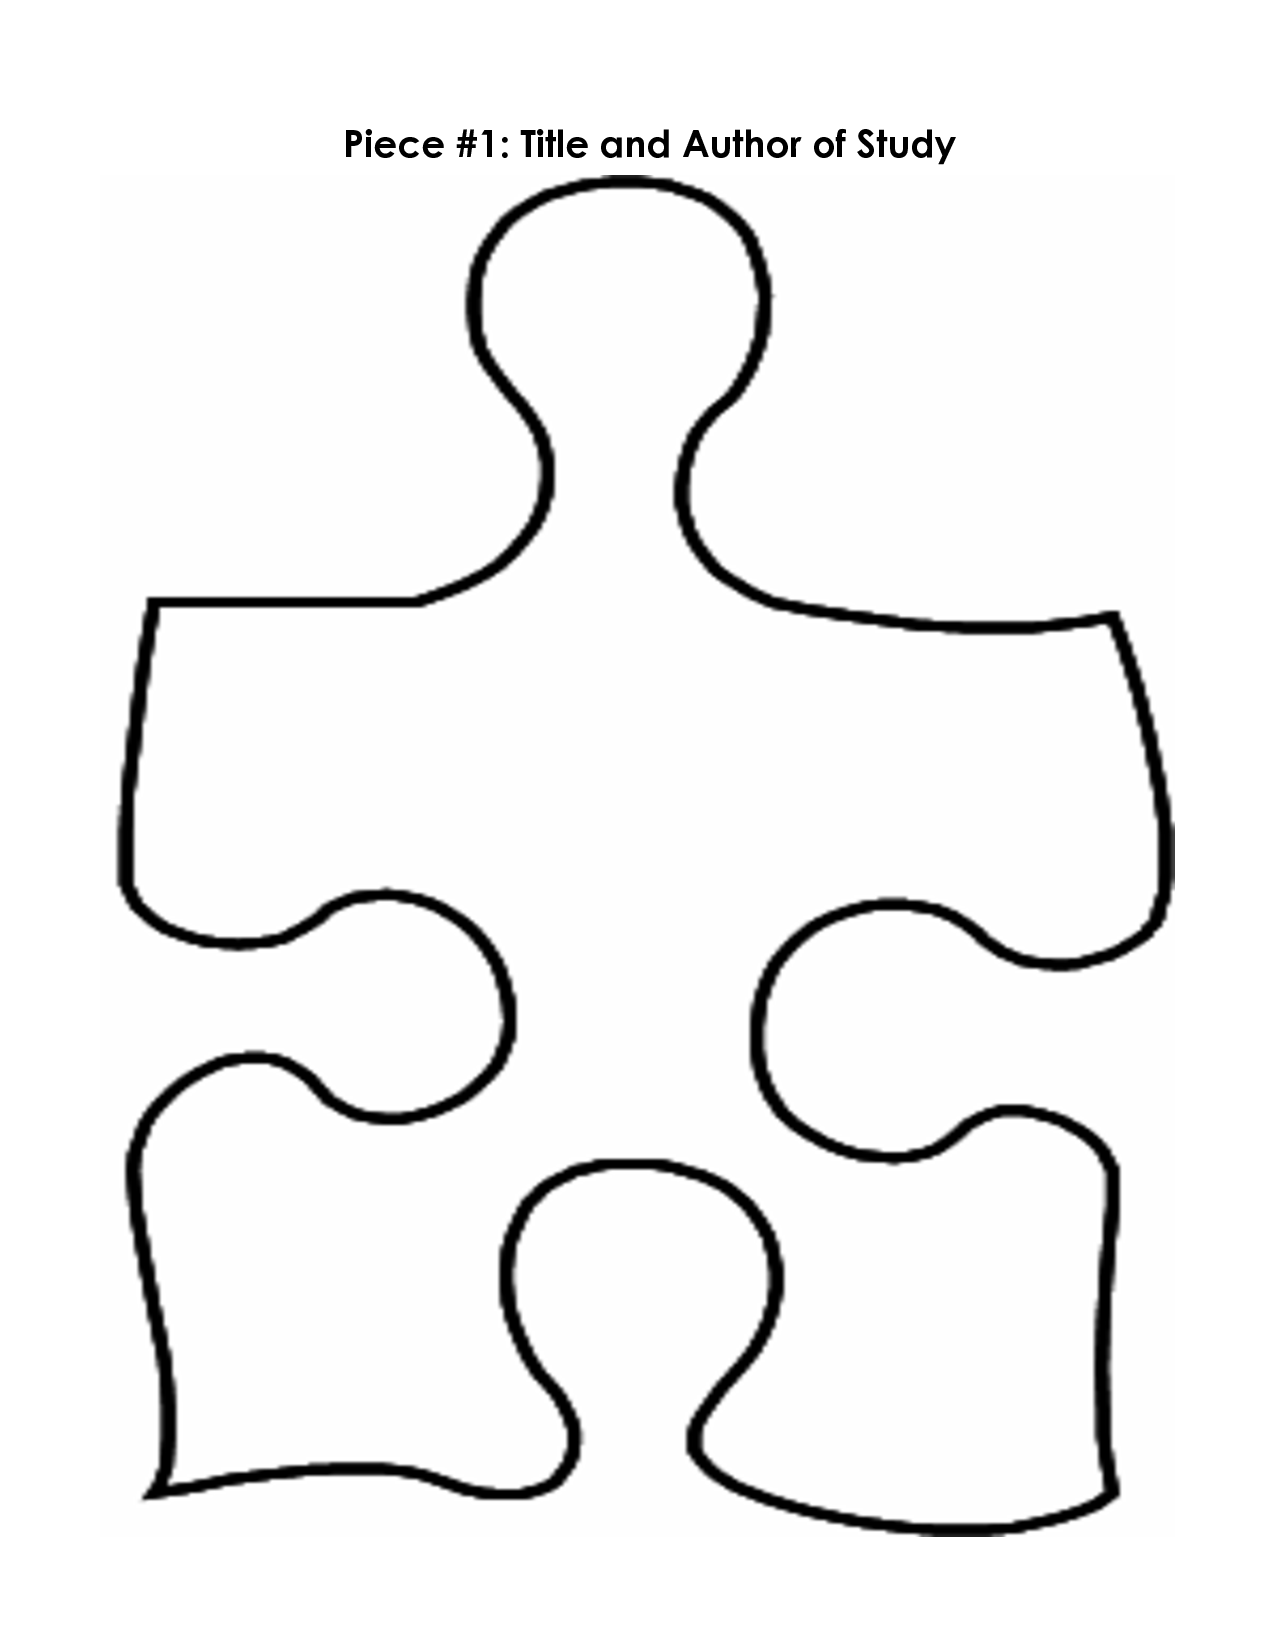 31 Puzzle Piece Template   Free Cliparts That You Can Download To You    